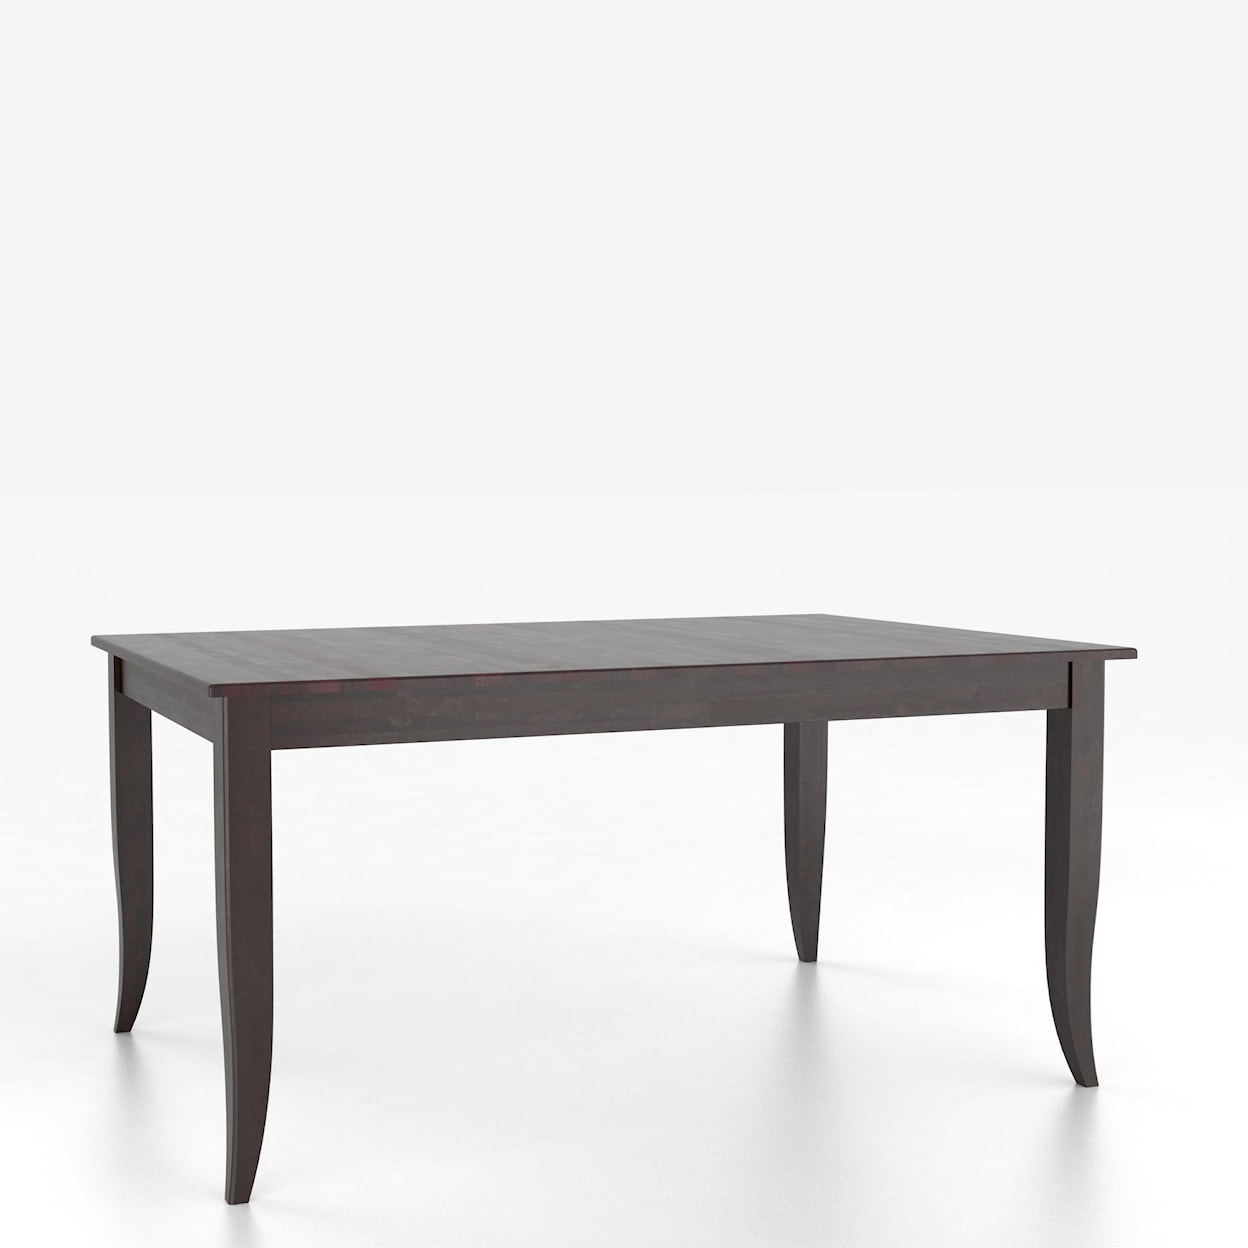 Canadel Custom Dining Tables Customizable Rectangular Table with Legs